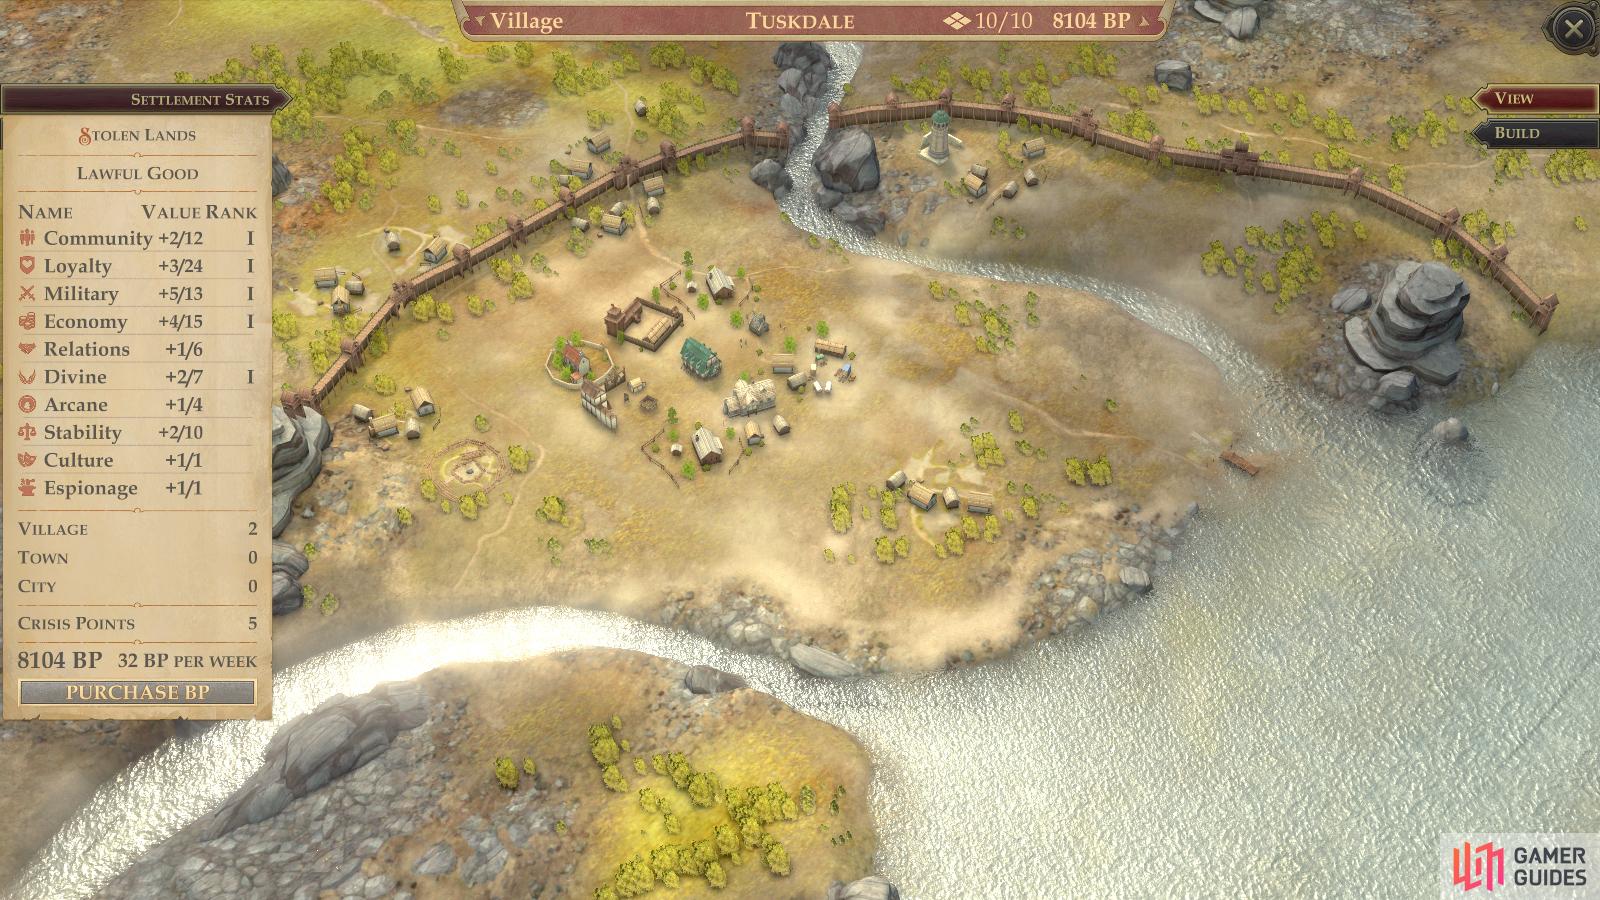 In the settlement screen you can queue buildings and check out the settlement's stats.